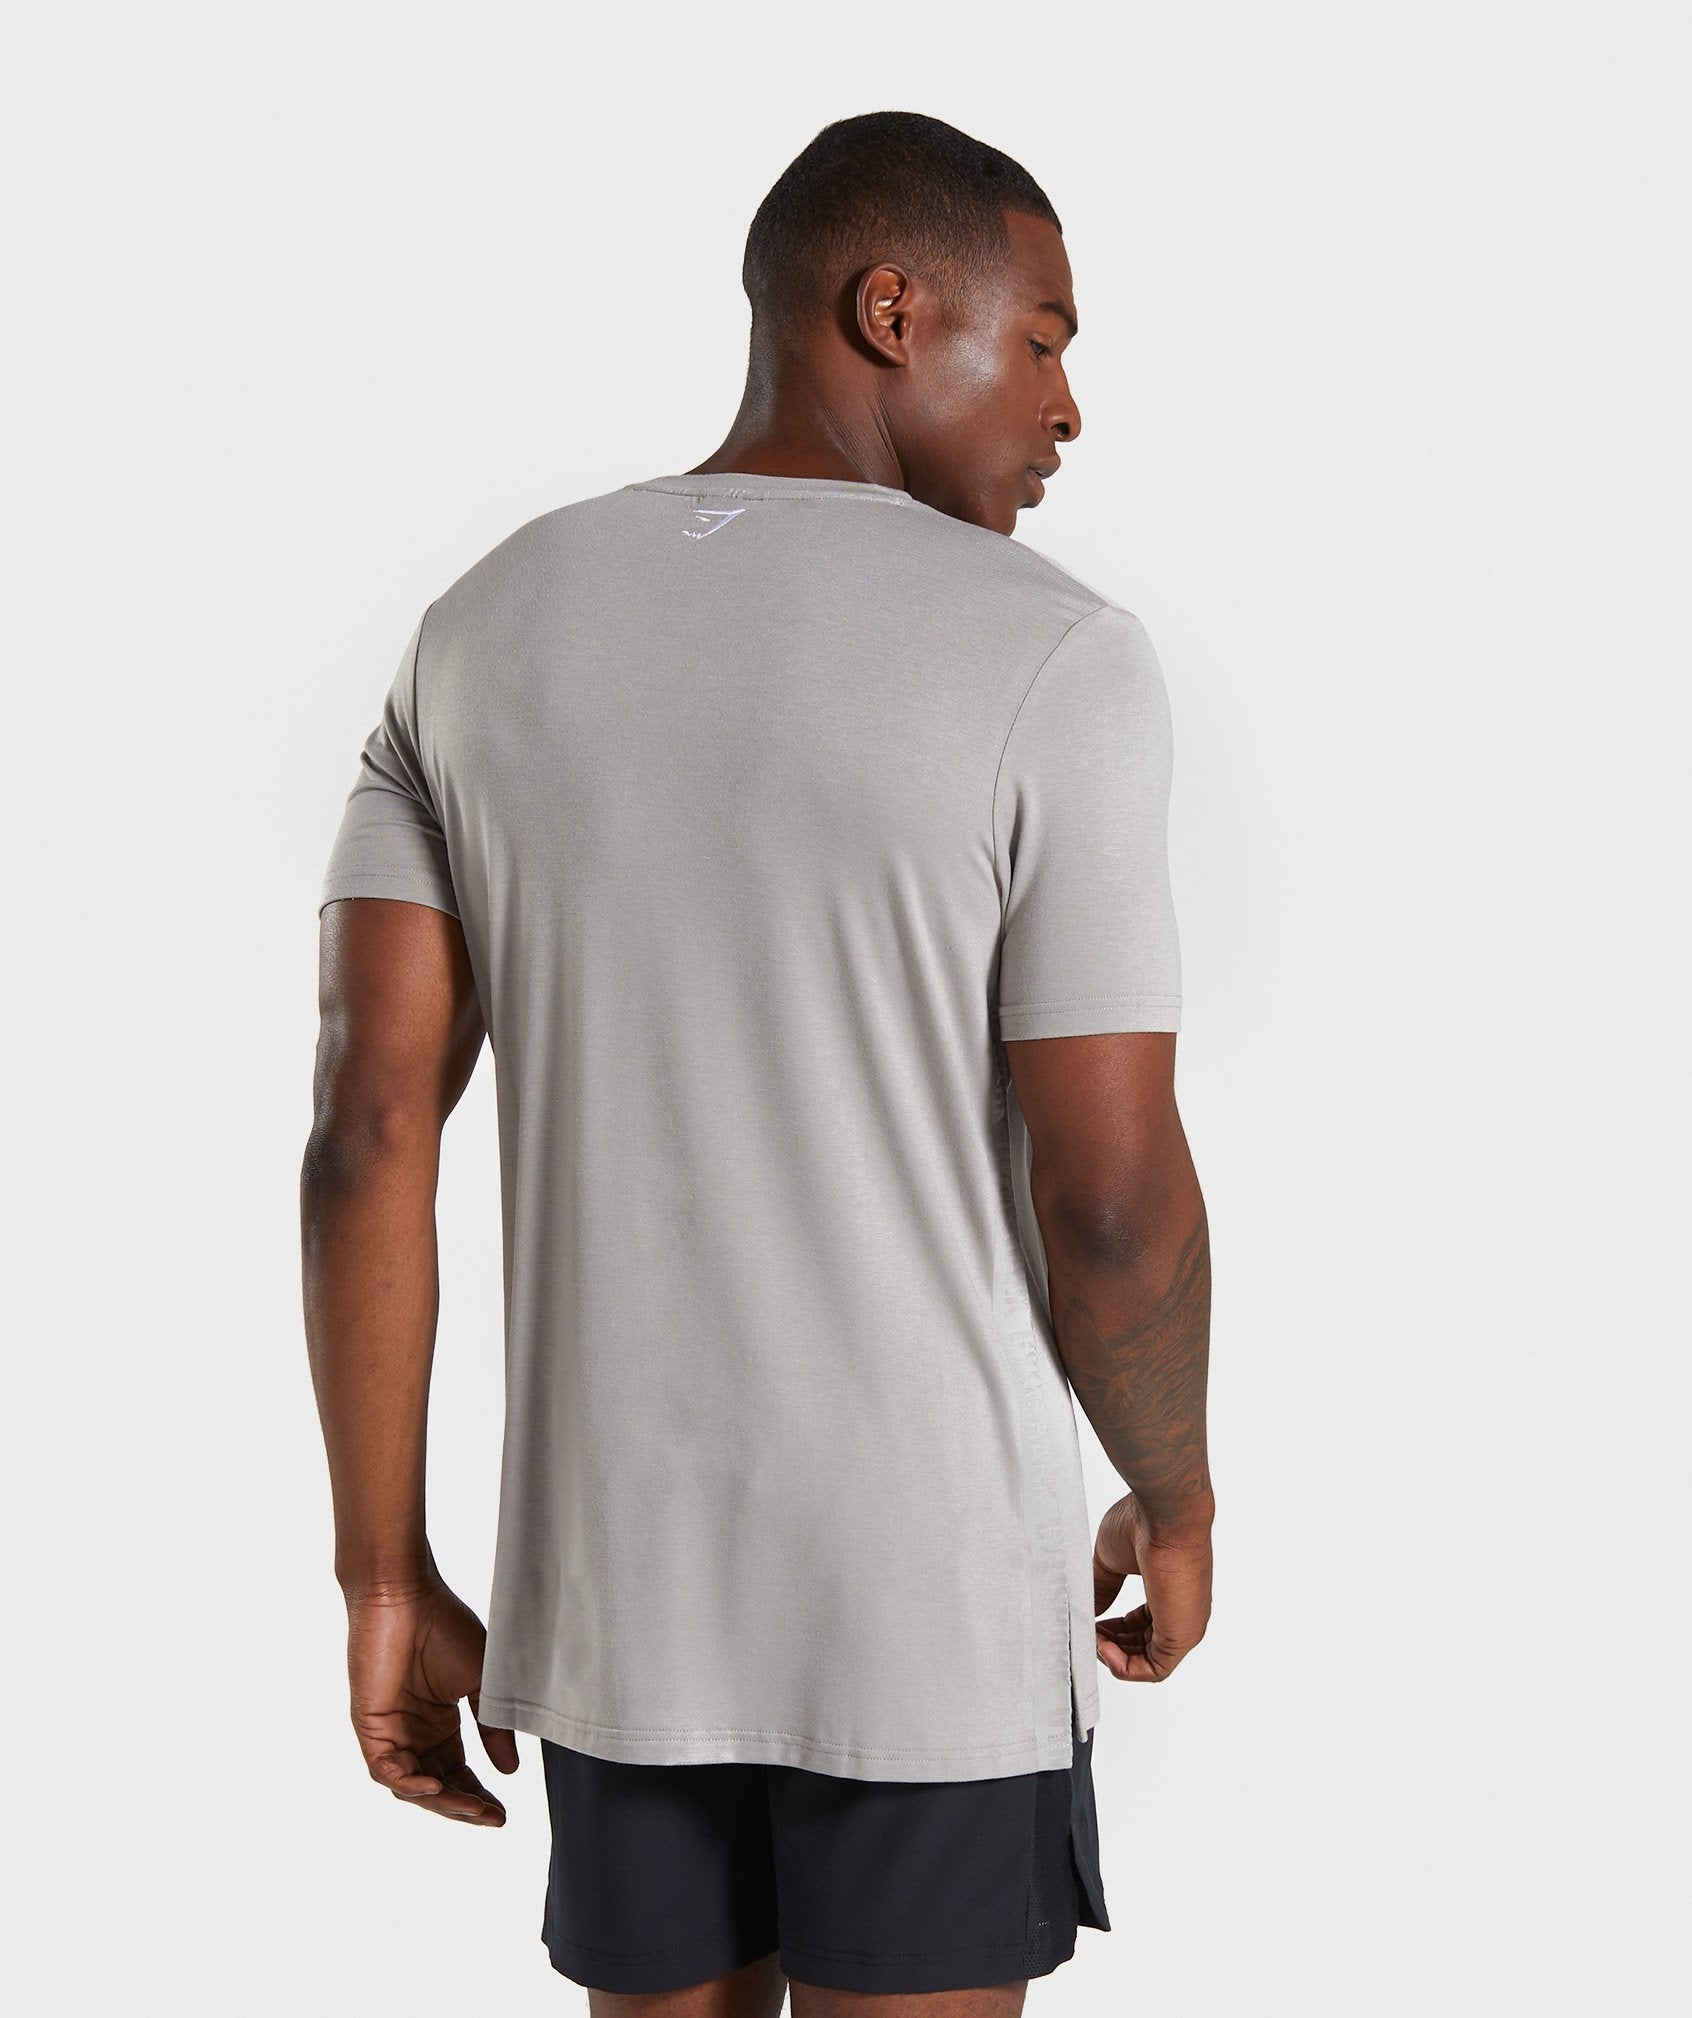 Shadow T-Shirt in Grey - view 2